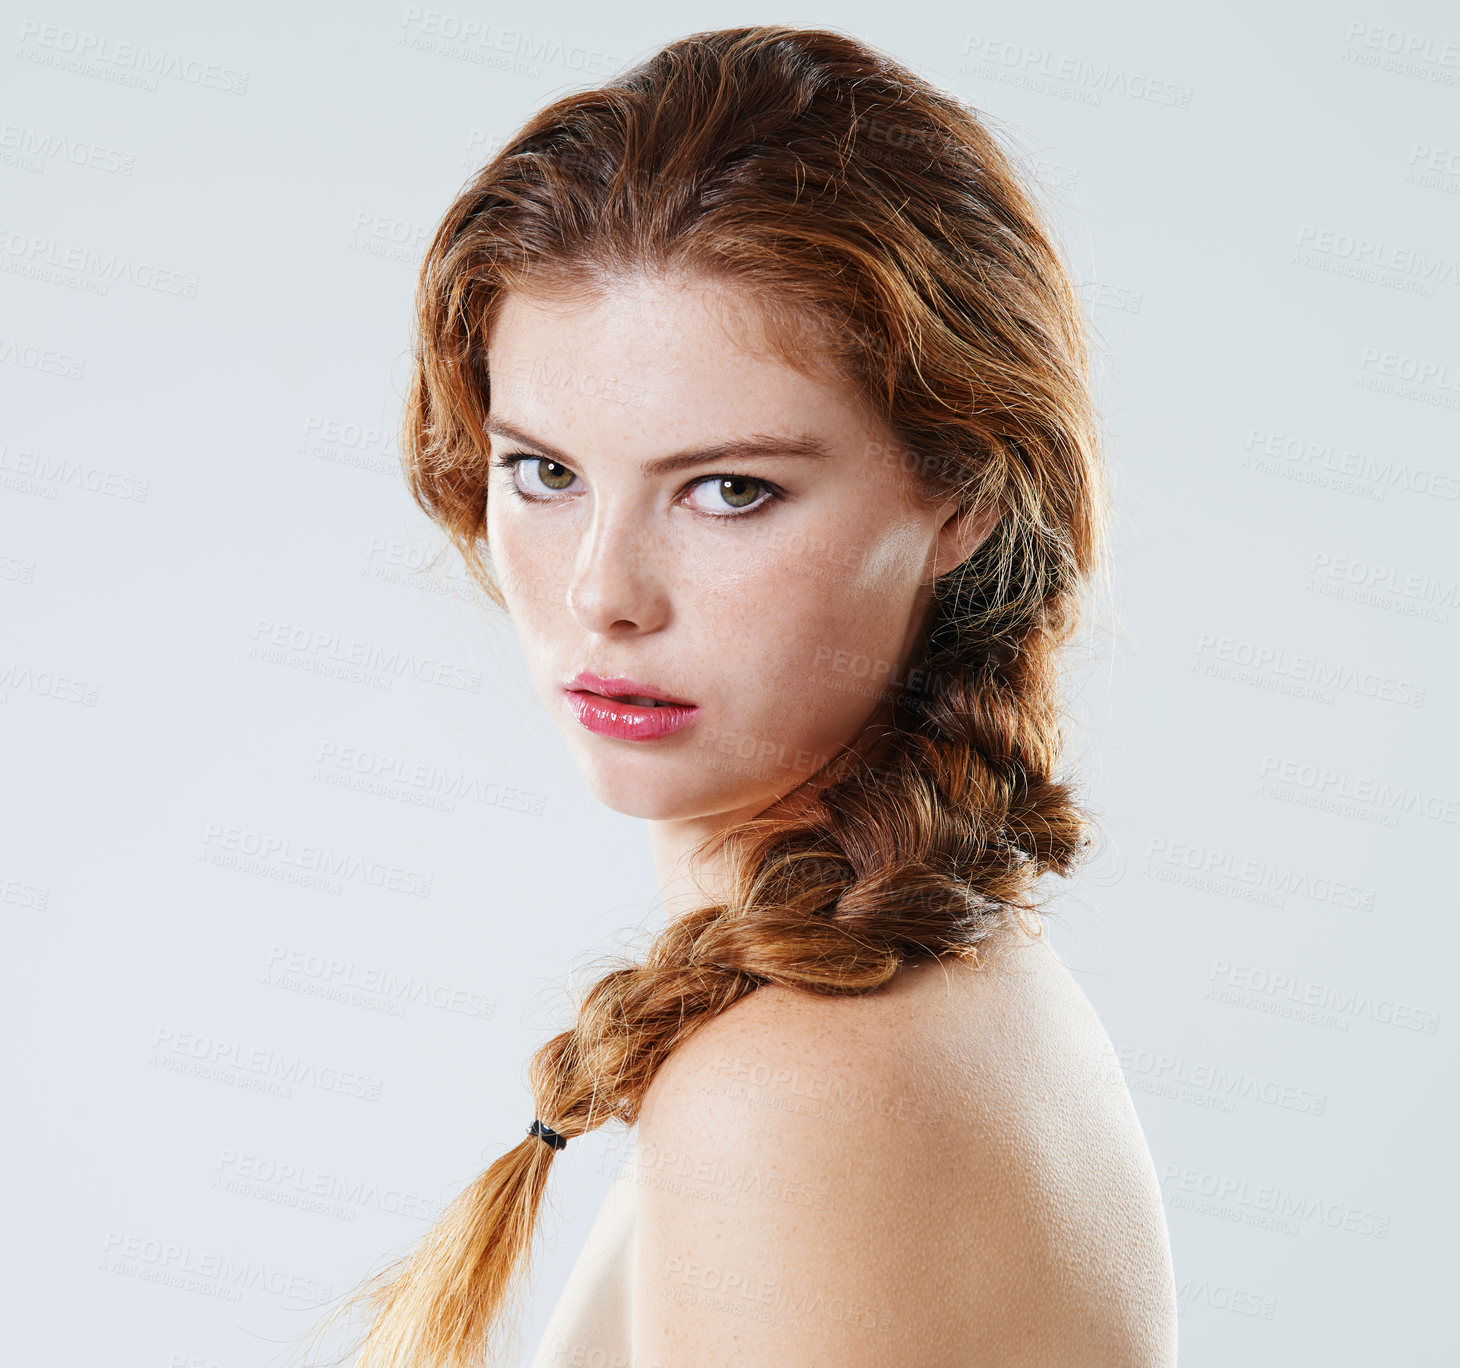 Buy stock photo Studio portrait of a beautiful young woman with braided hair looking over her bare shoulder